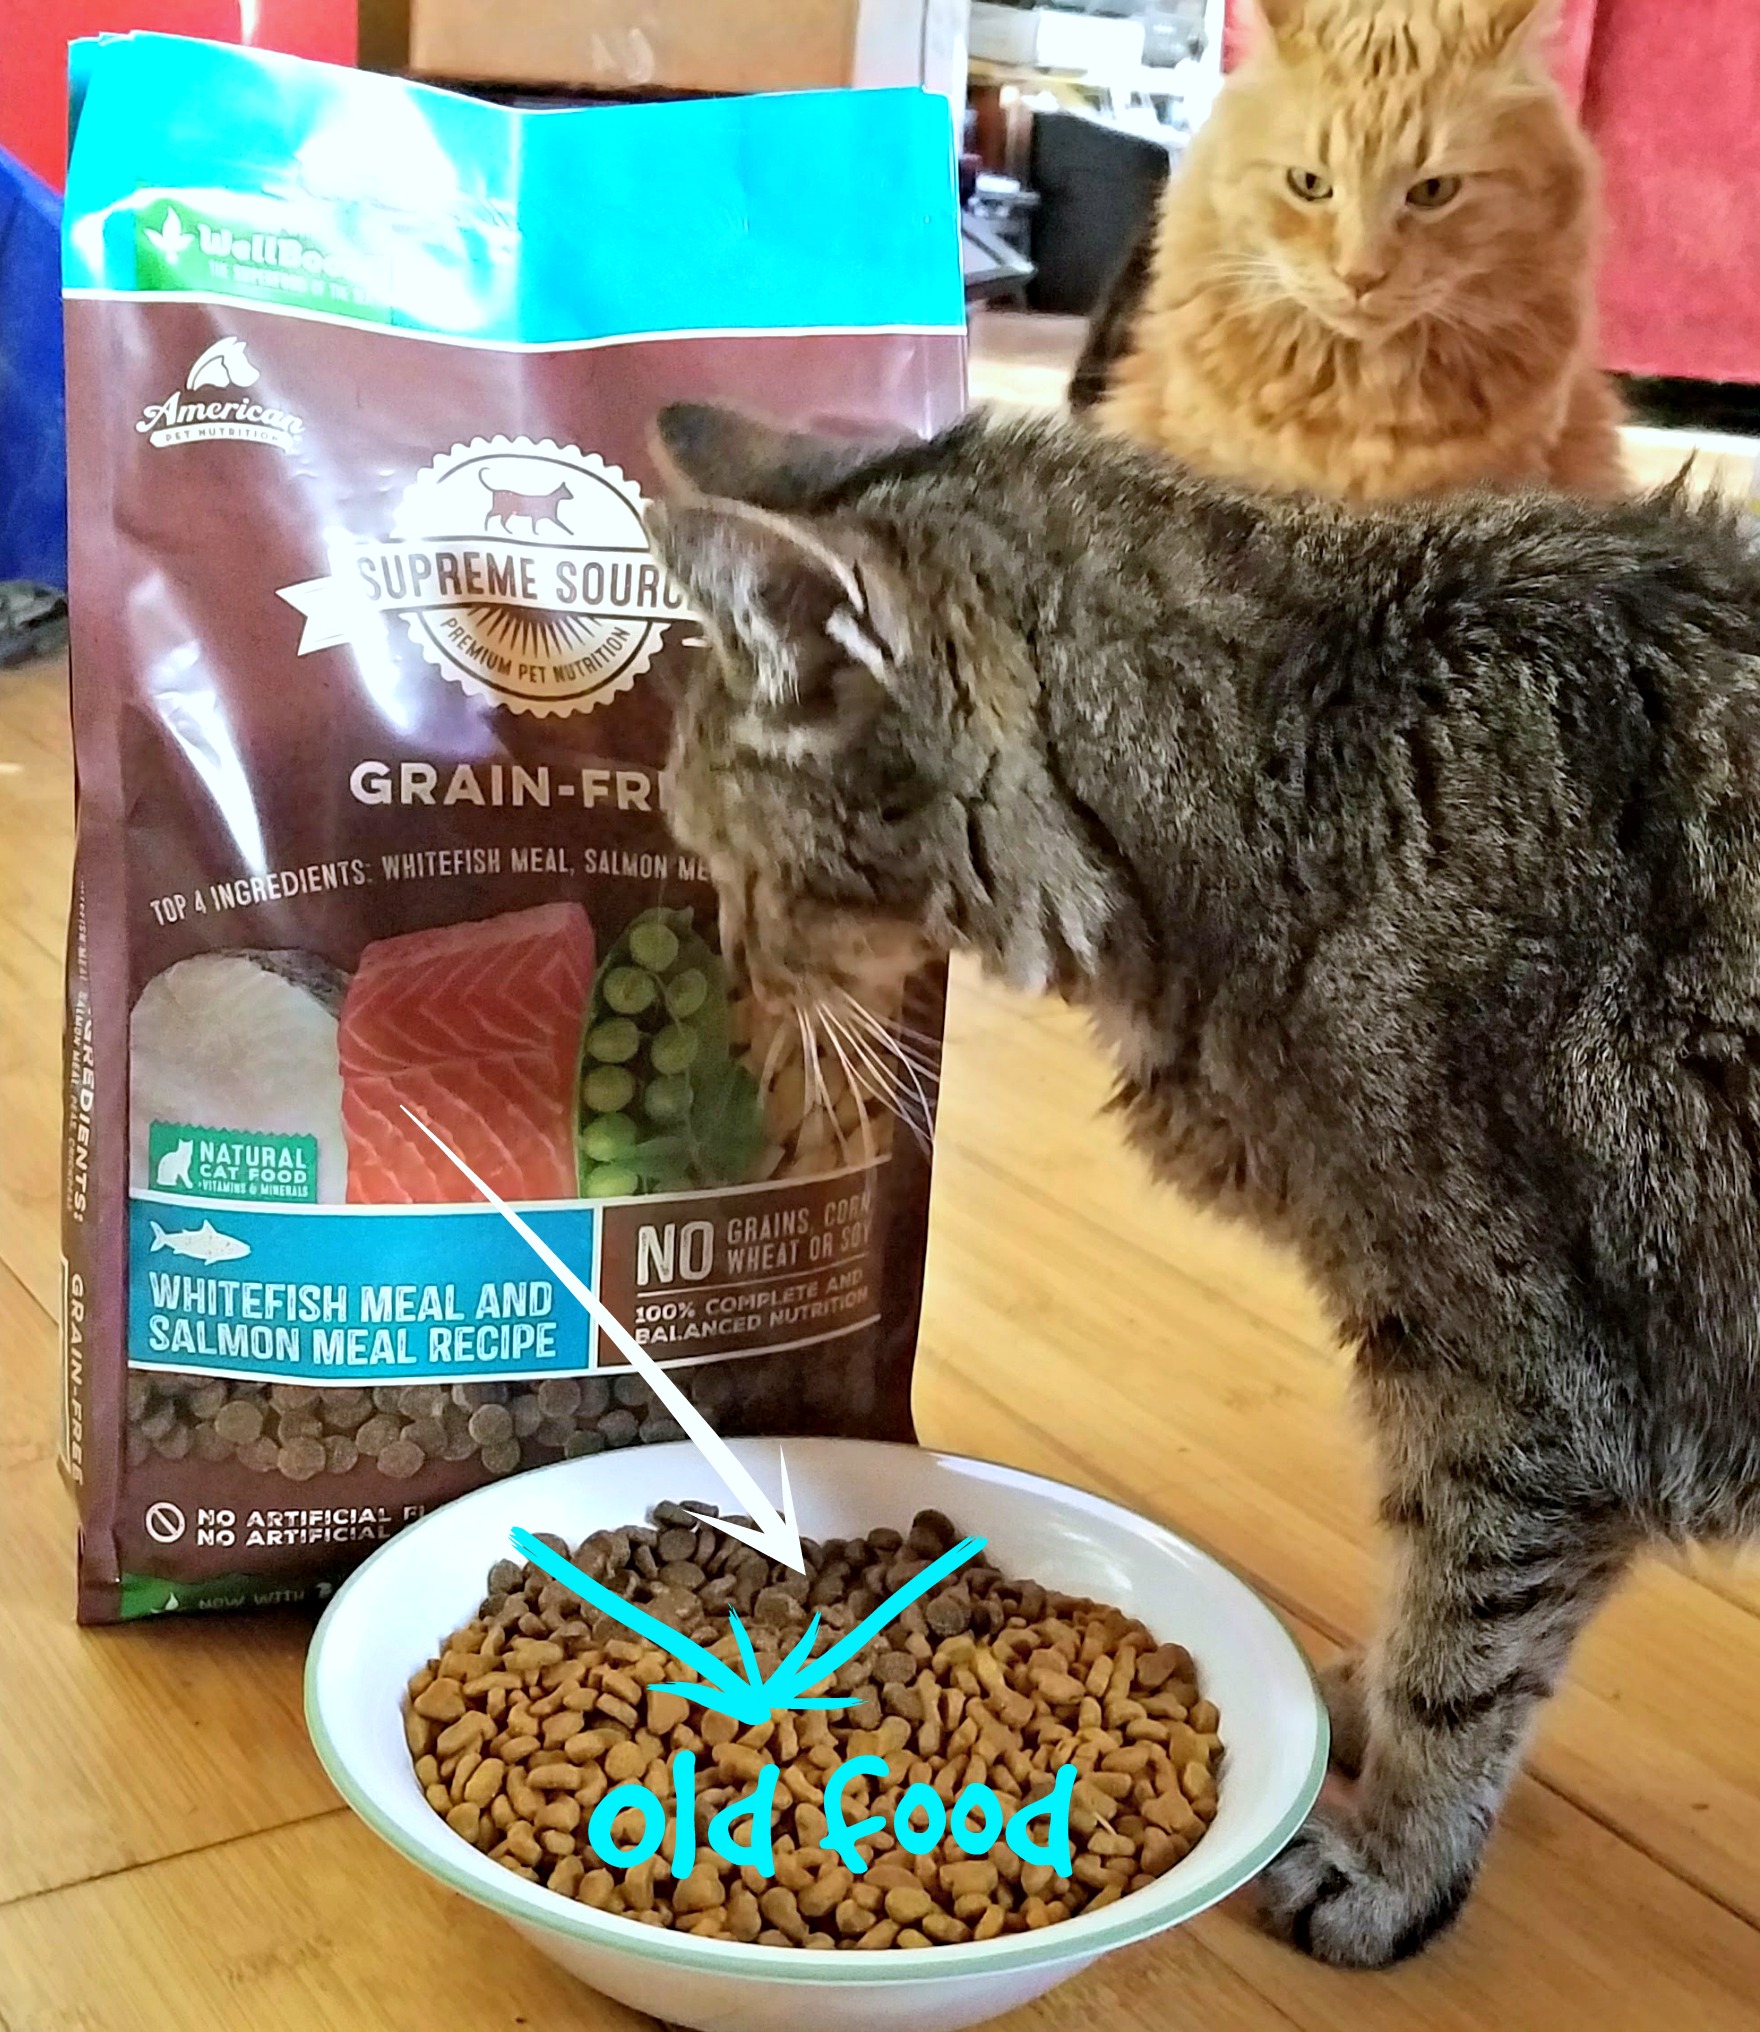 Supreme Source Grain Free Cat Food, quality cat food, #SuperFoodSwitch, #IC, AD